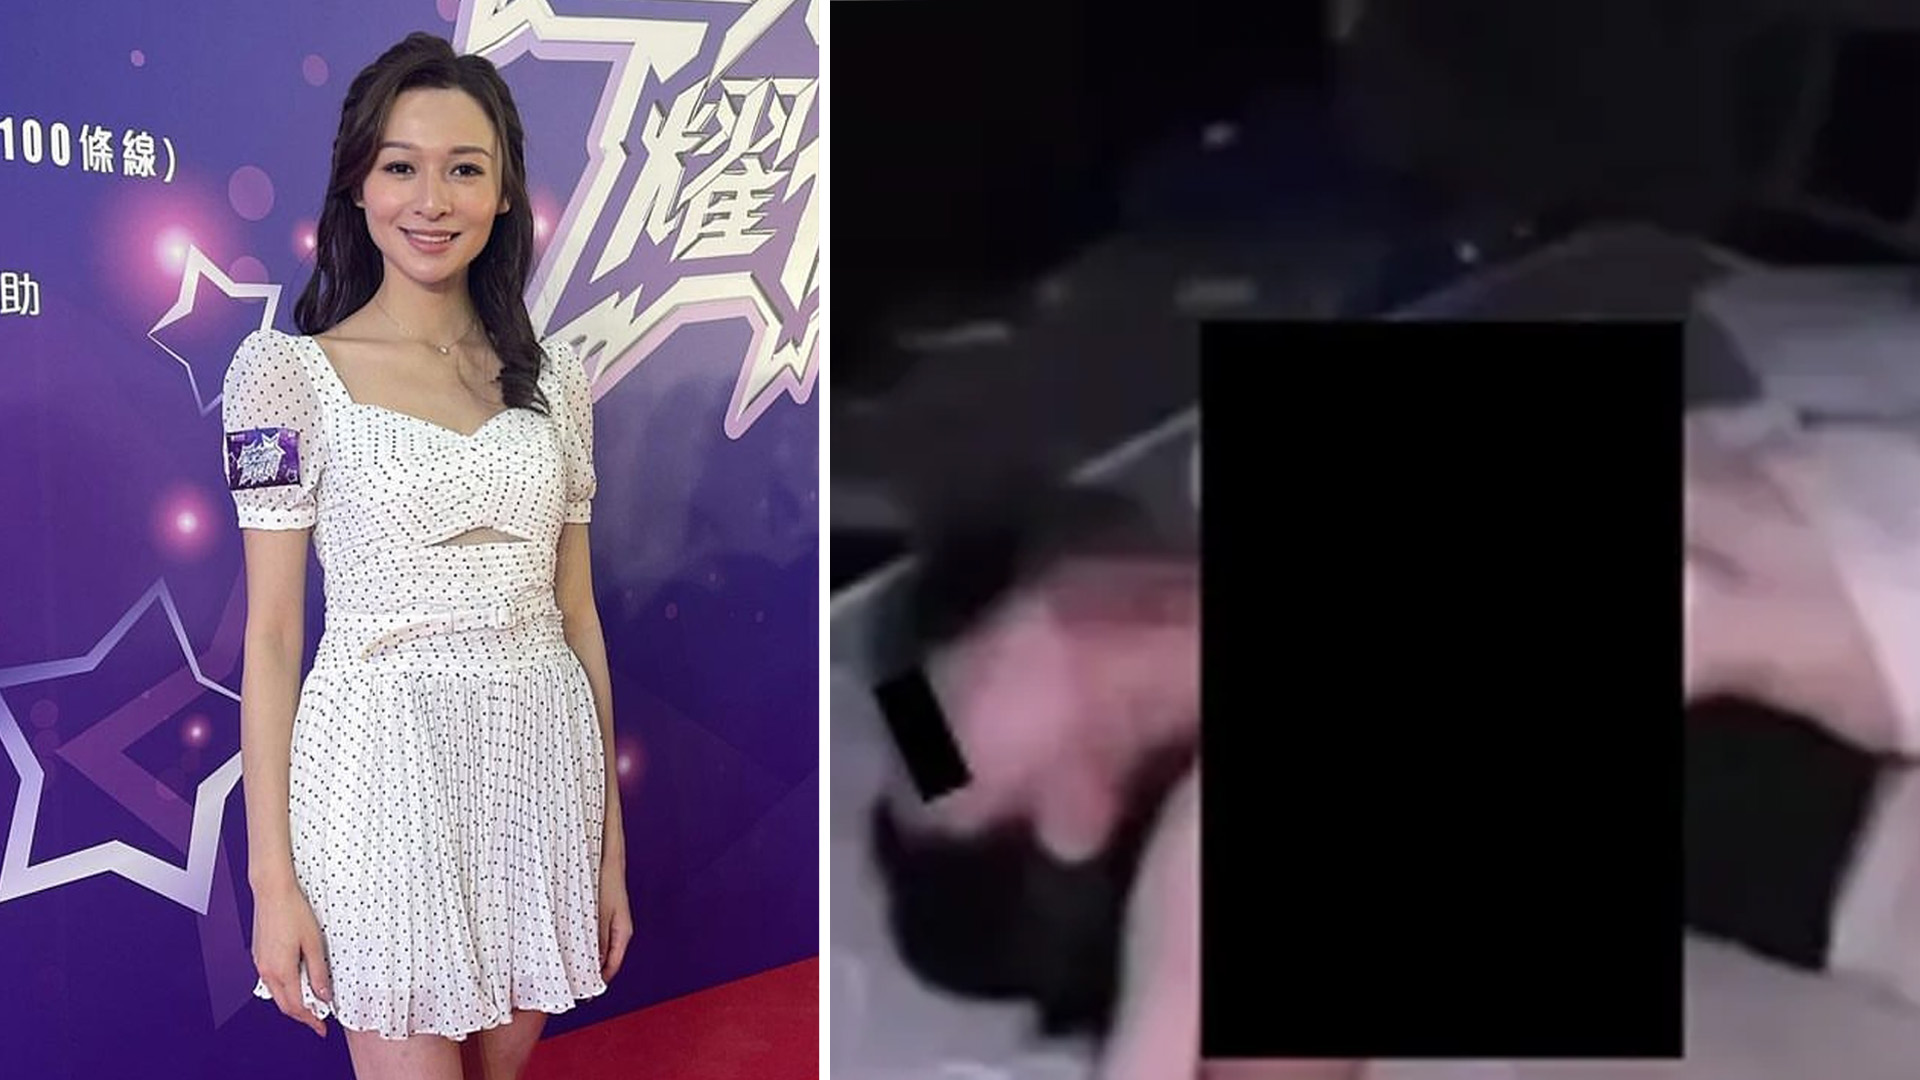 Nudist Pageant Ru - Miss Hong Kong 2022 Denice Lam Denies She Is The Woman In Alleged Sex Tape  - 8days